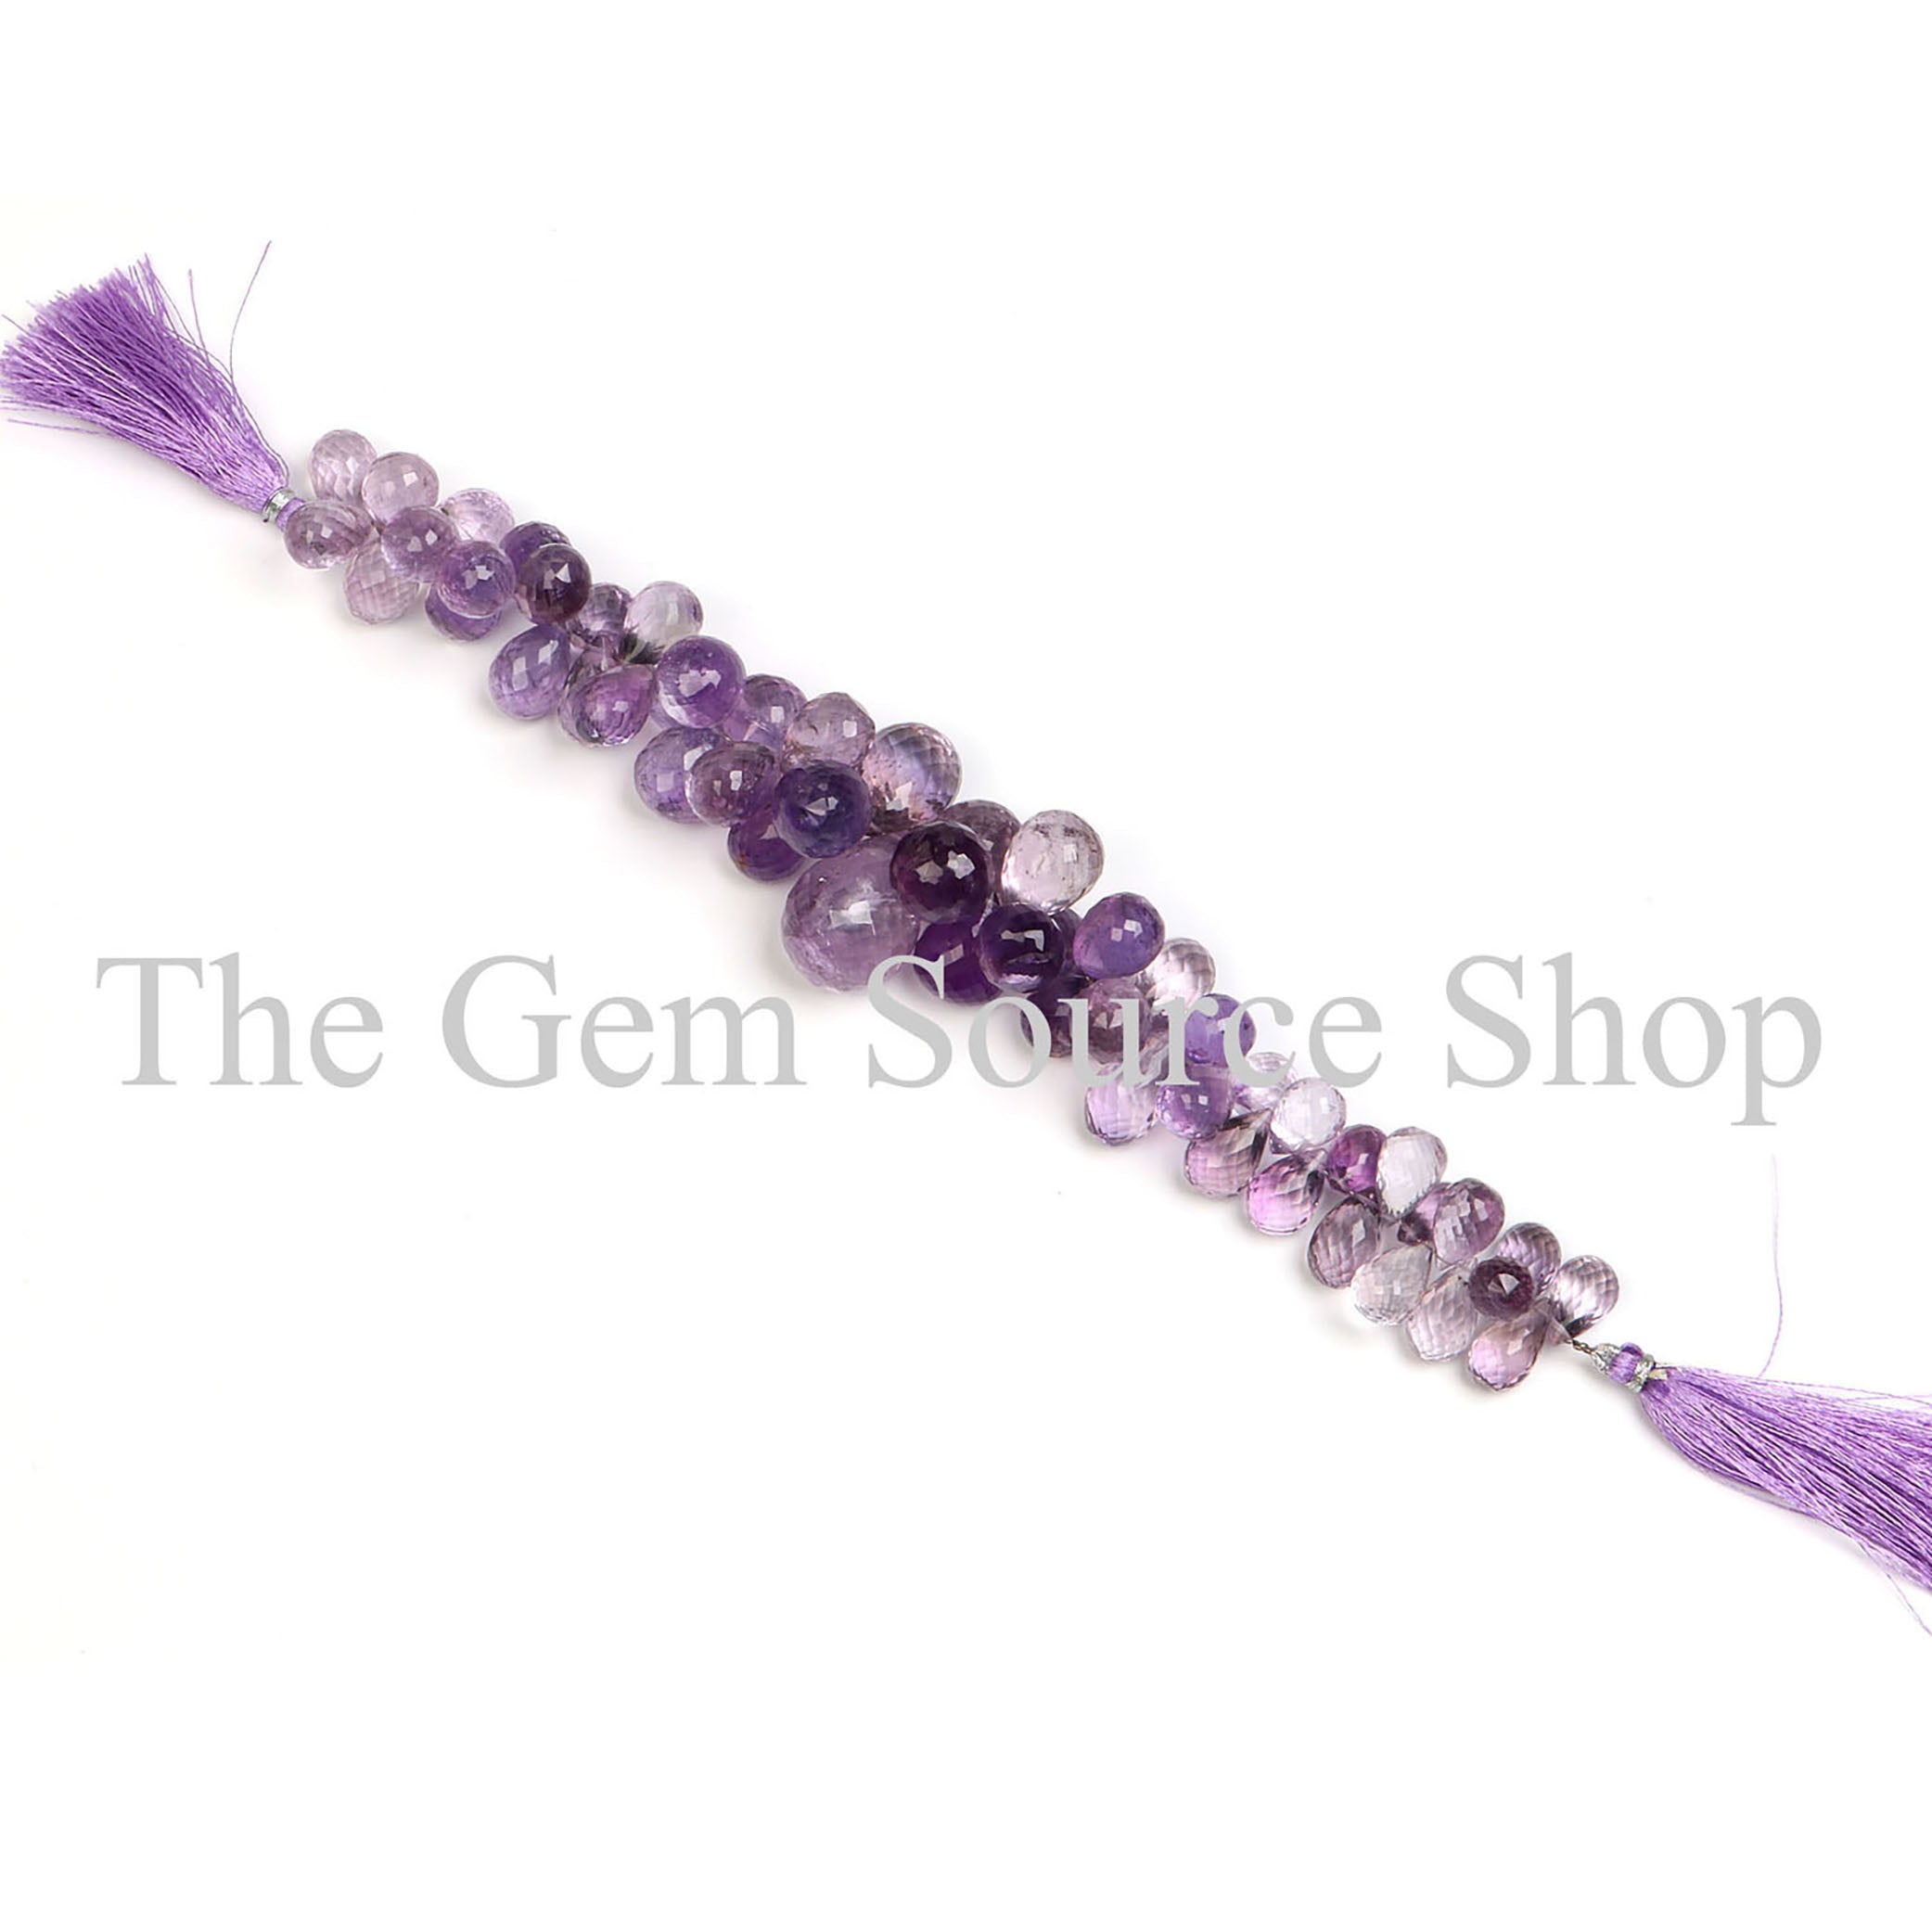 Beads Strand For Jewelry 